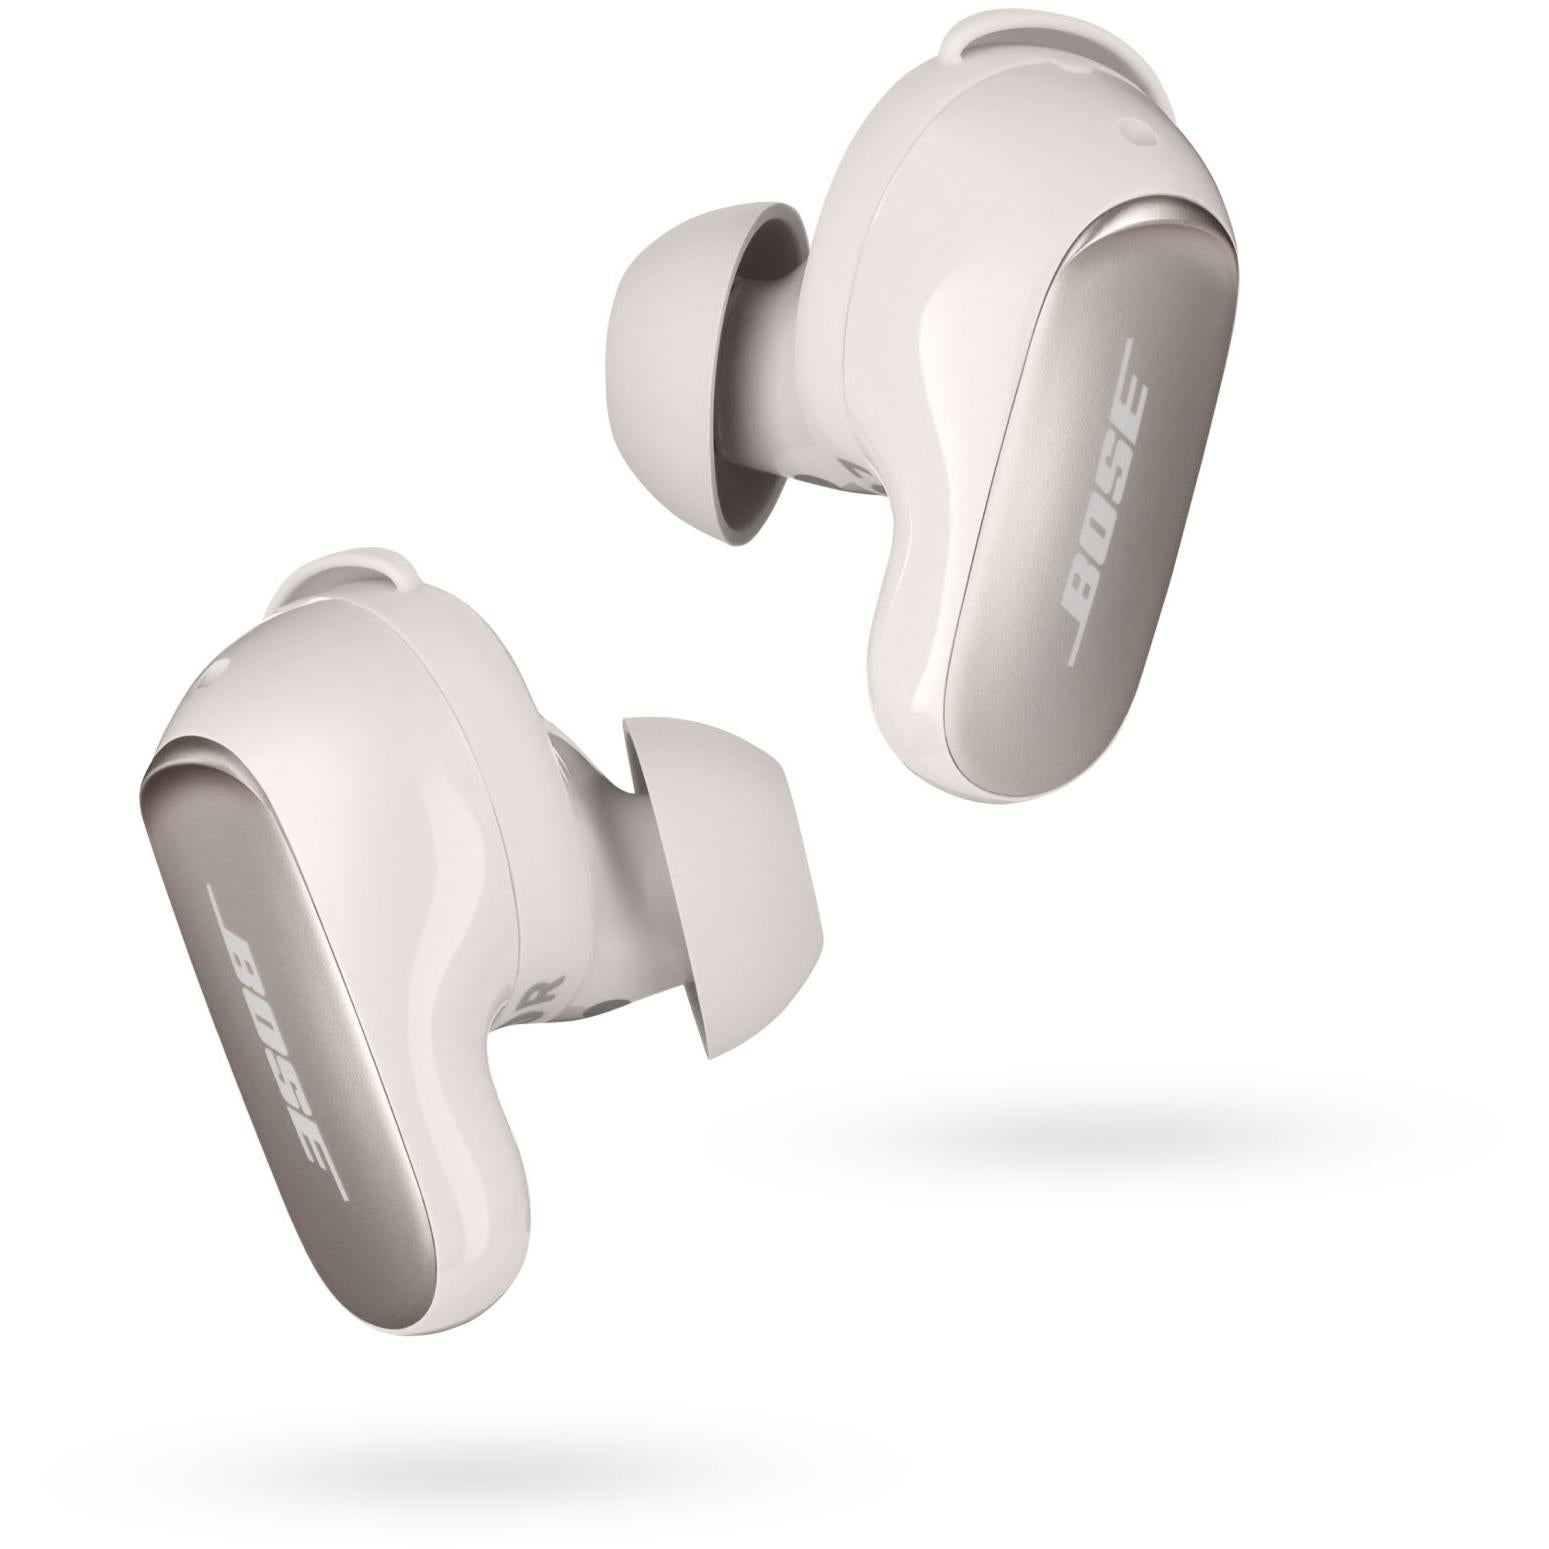 bose quietcomfort ultra wireless noise cancelling earbuds (white)